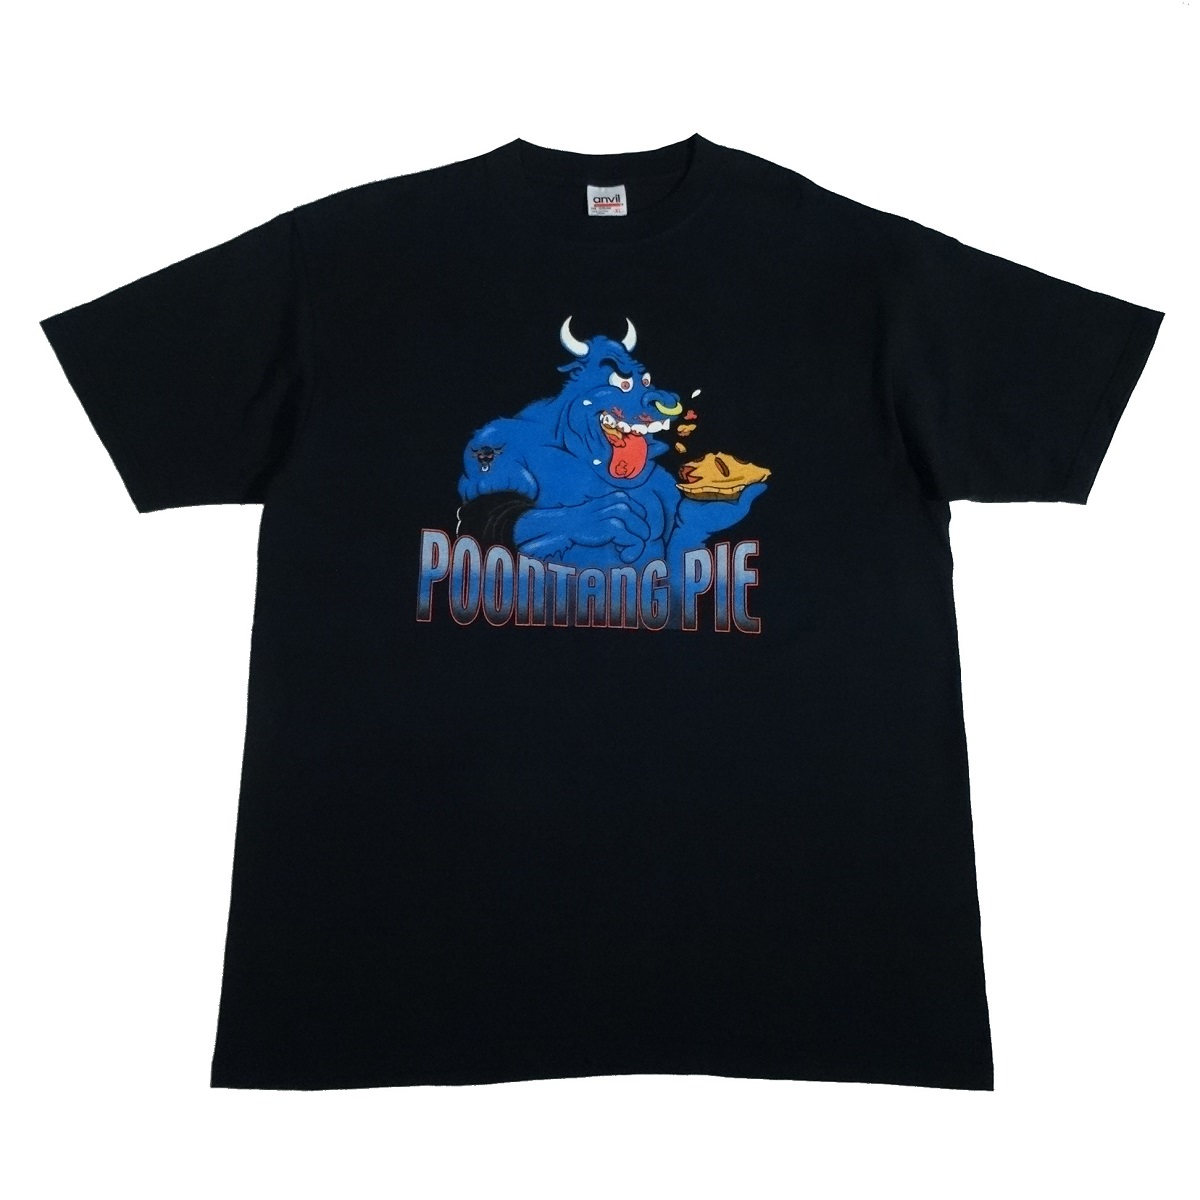 the rock wwf poontang pie vintage t shirt front